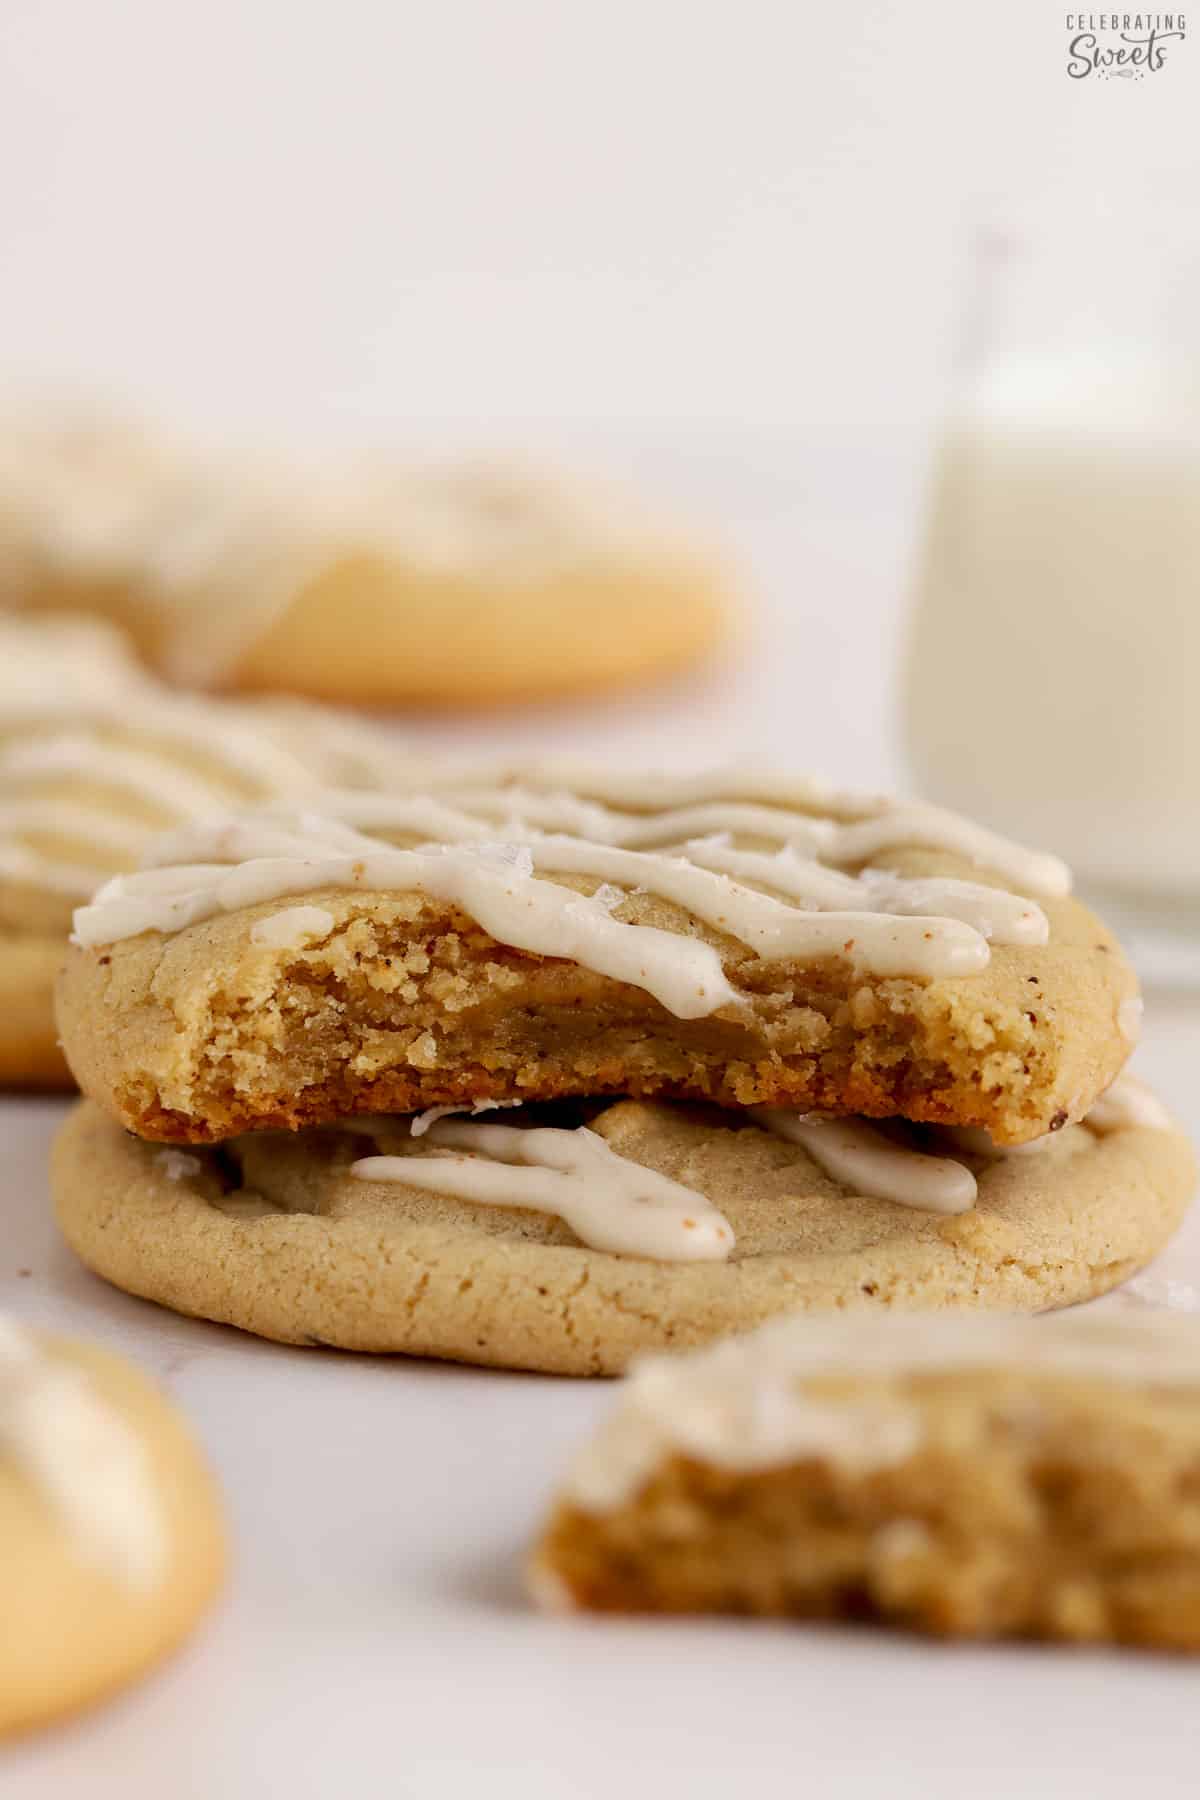 Closeup of a brown butter cookie with a bite take out of it.